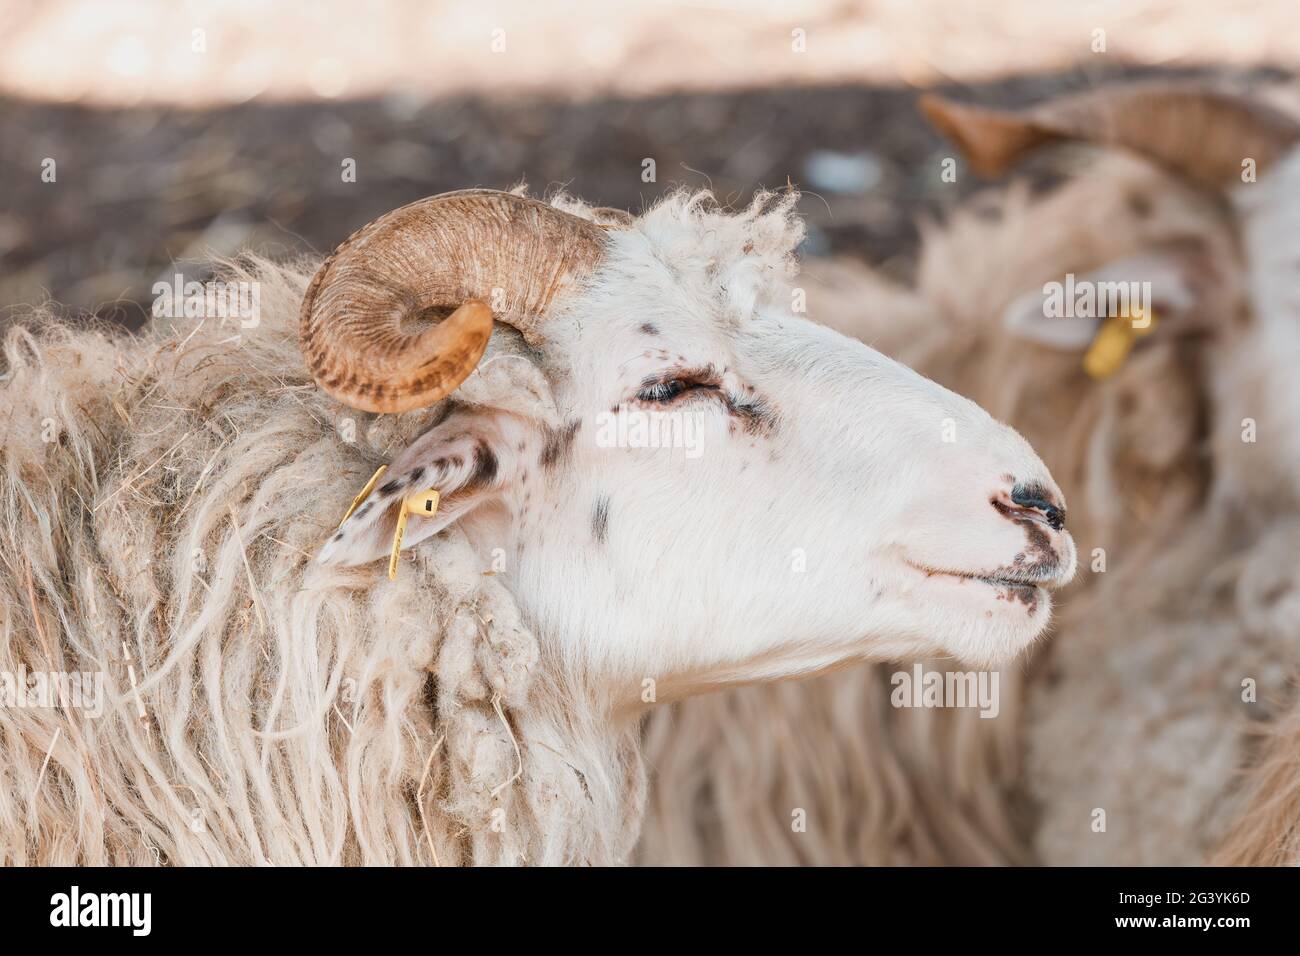 Ram or tup, male of sheep Stock Photo